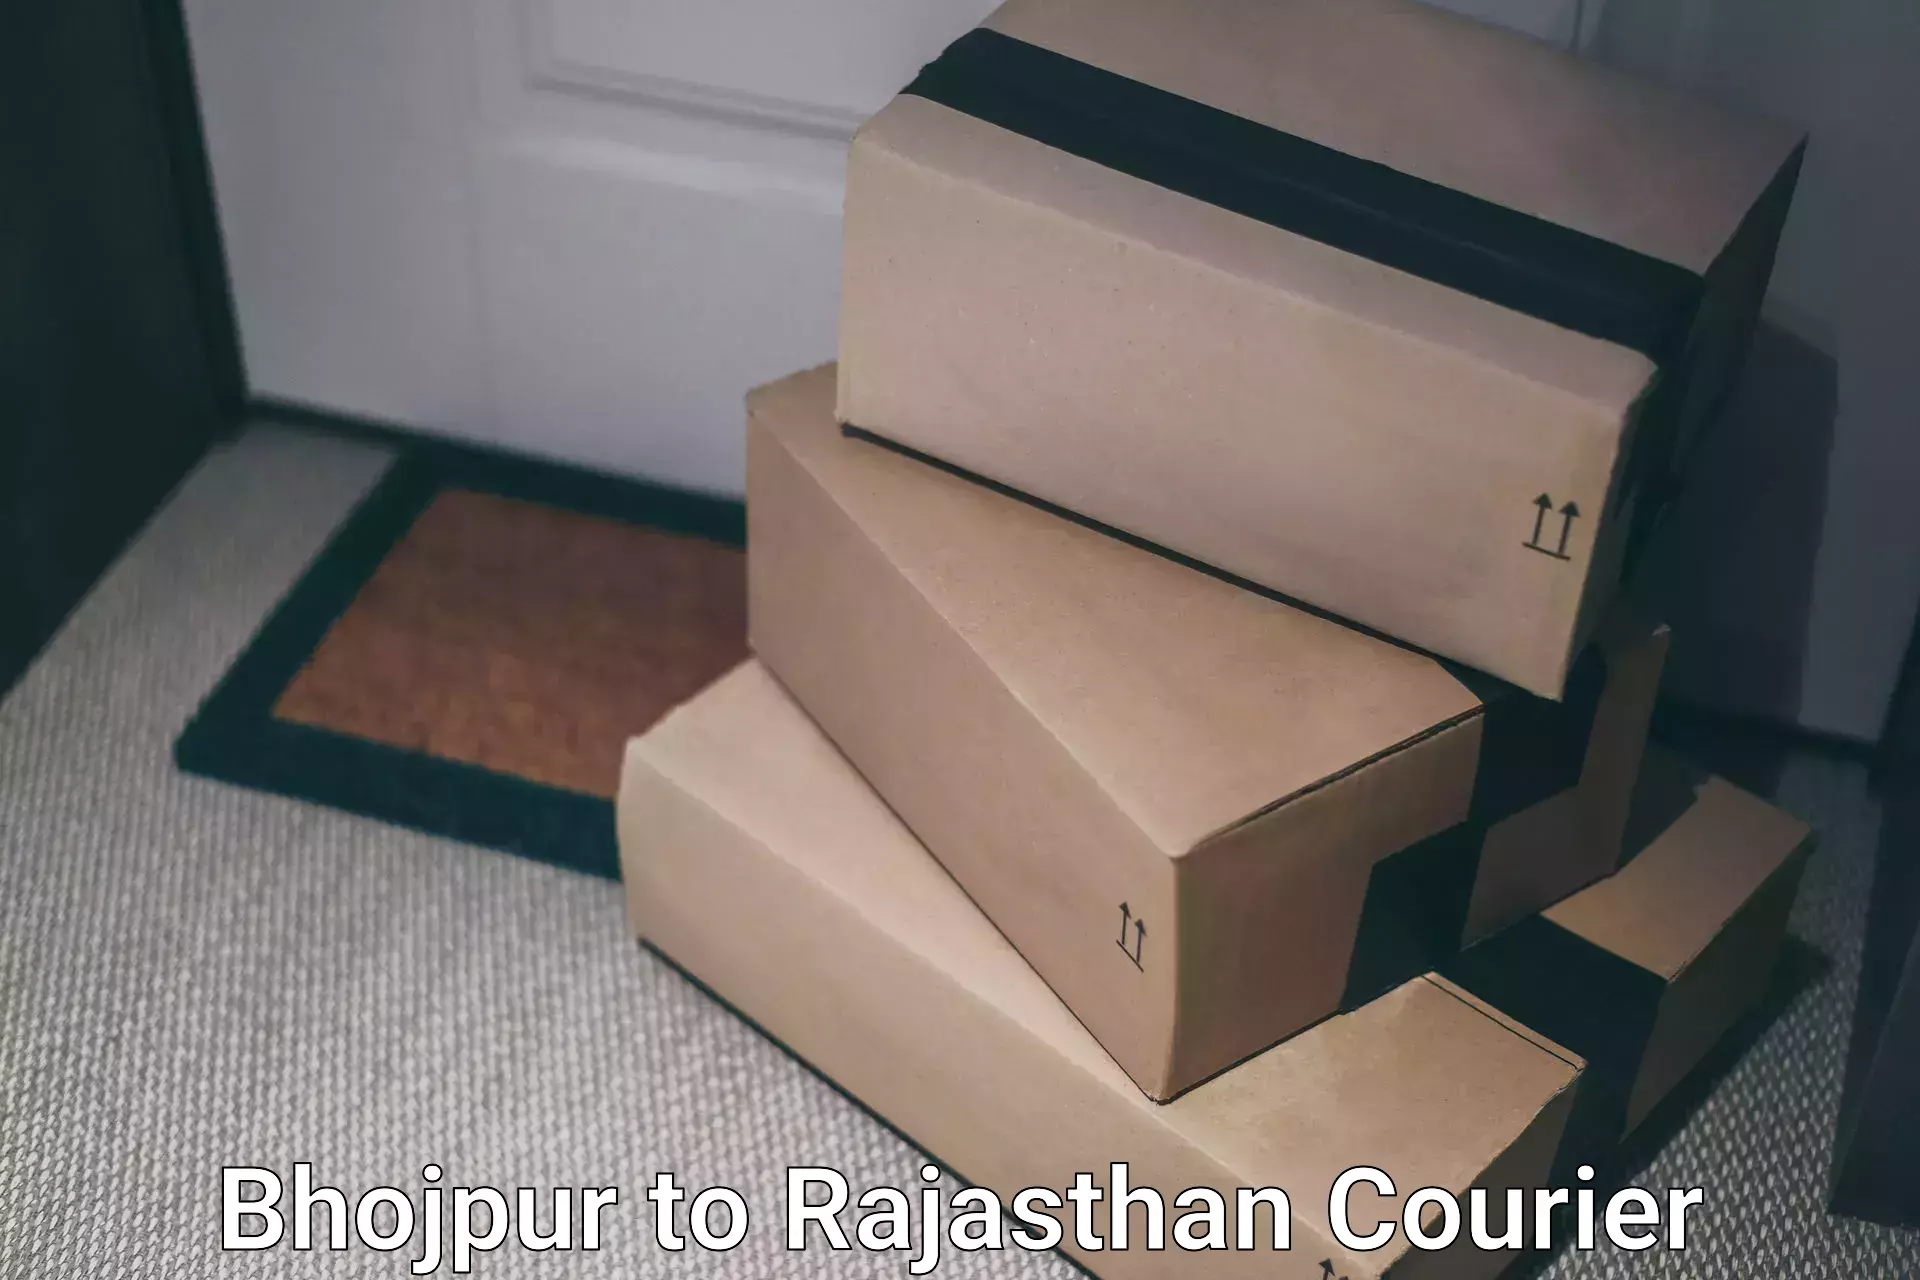 Flexible shipping options in Bhojpur to Rajgarh Rajasthan